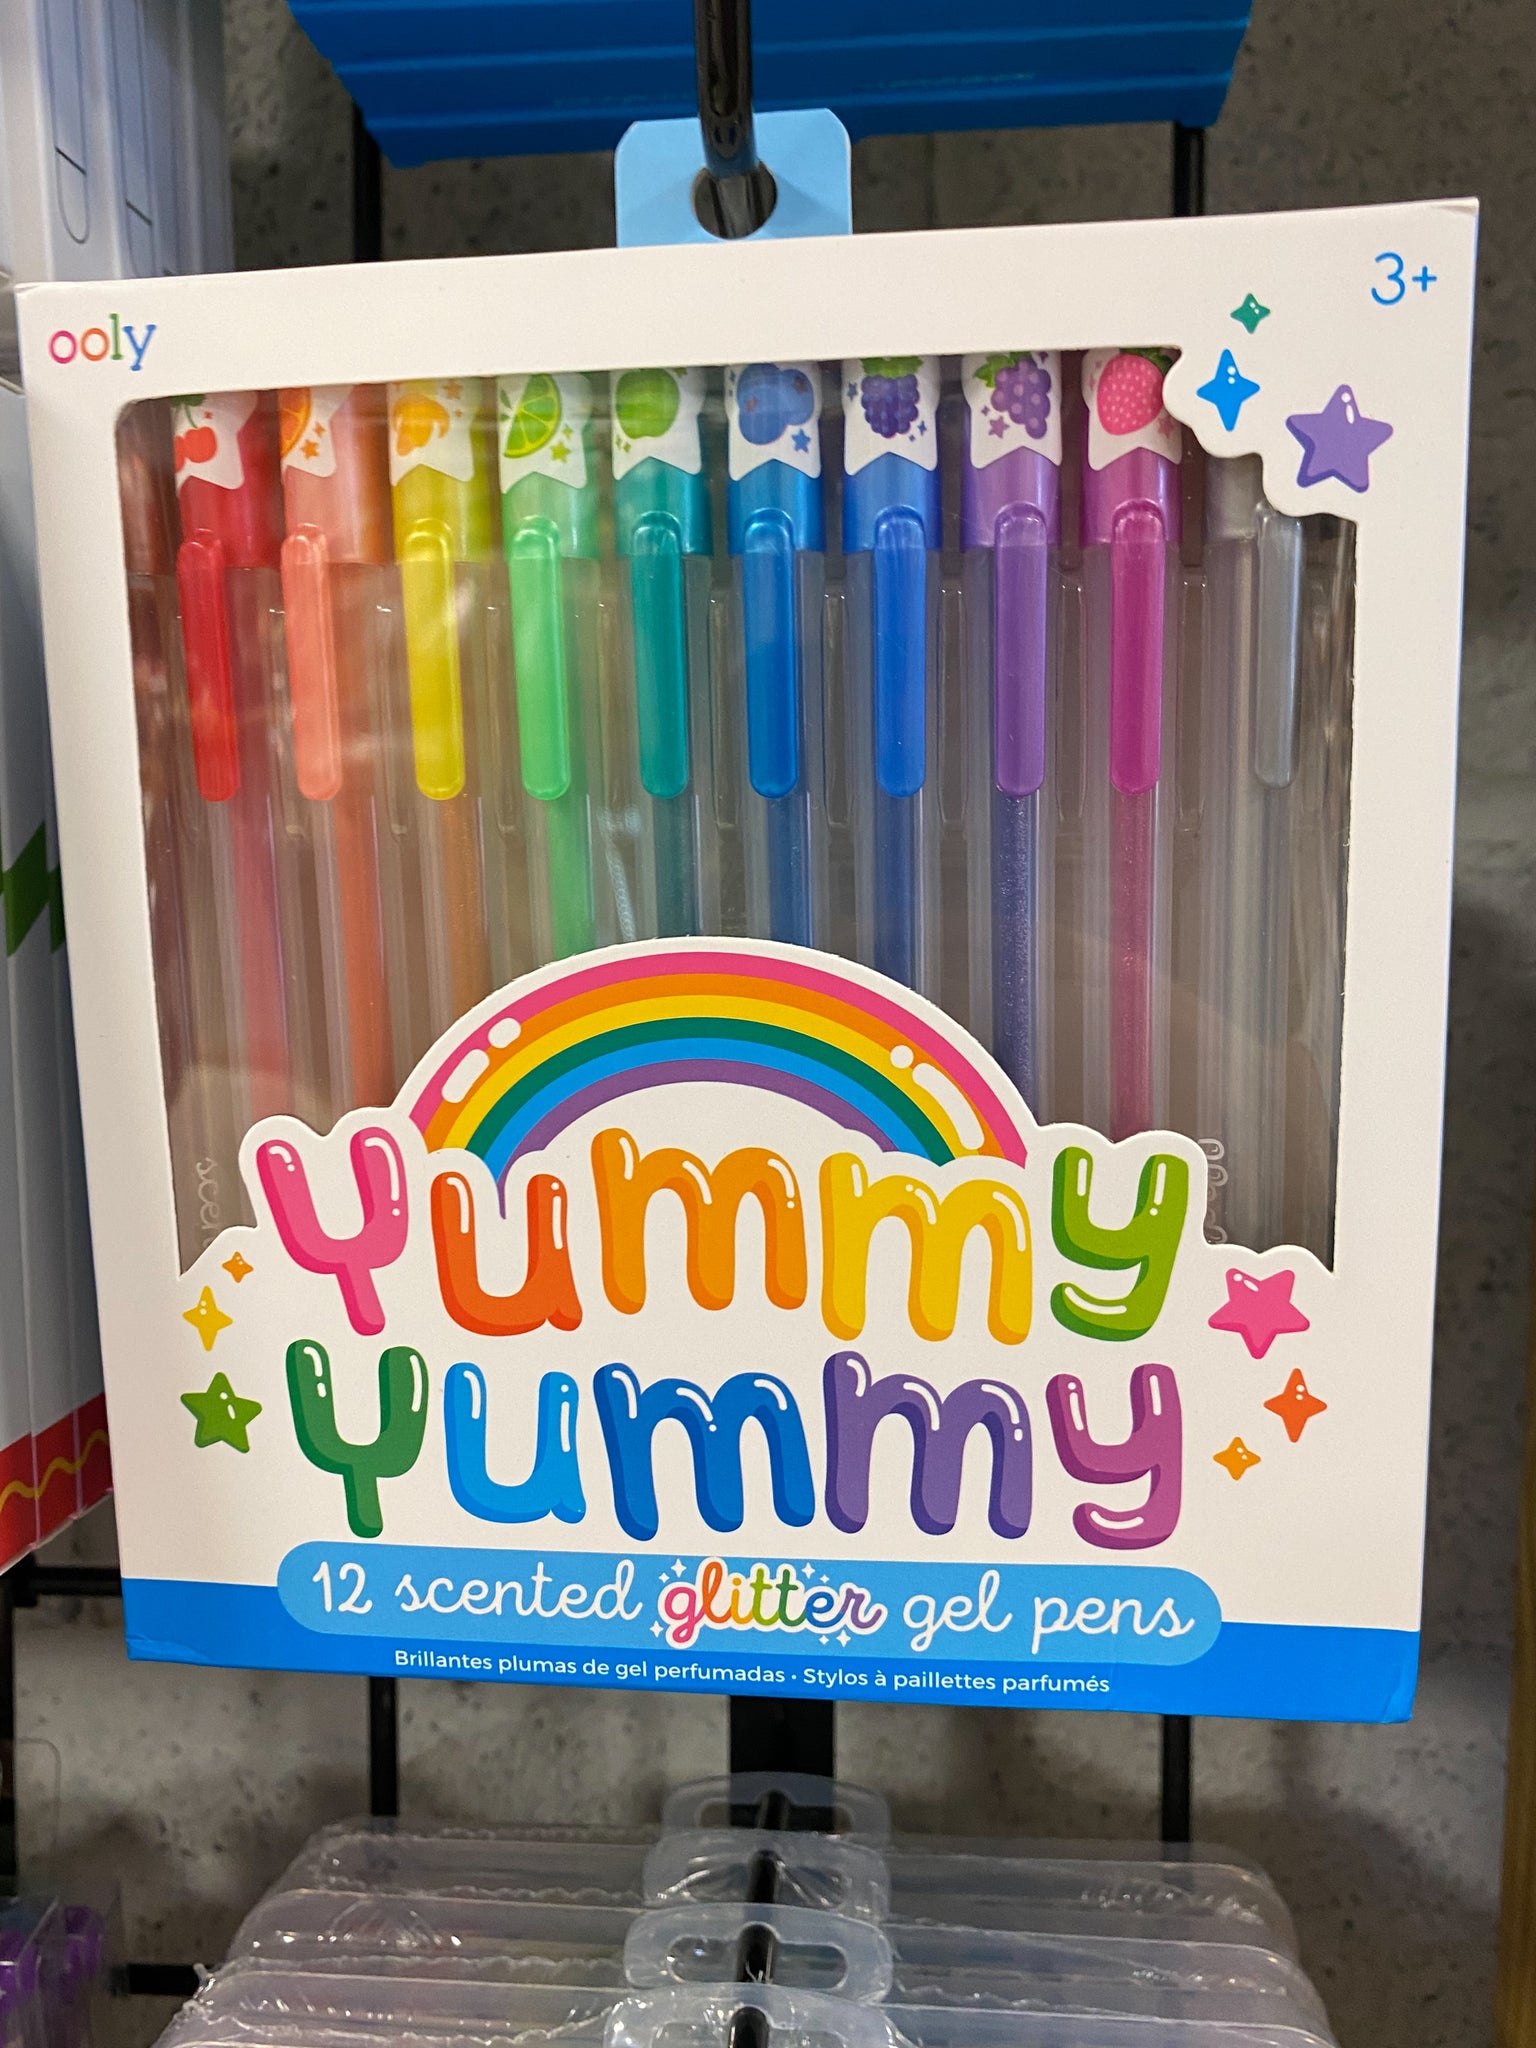 Yummy Scented Pens